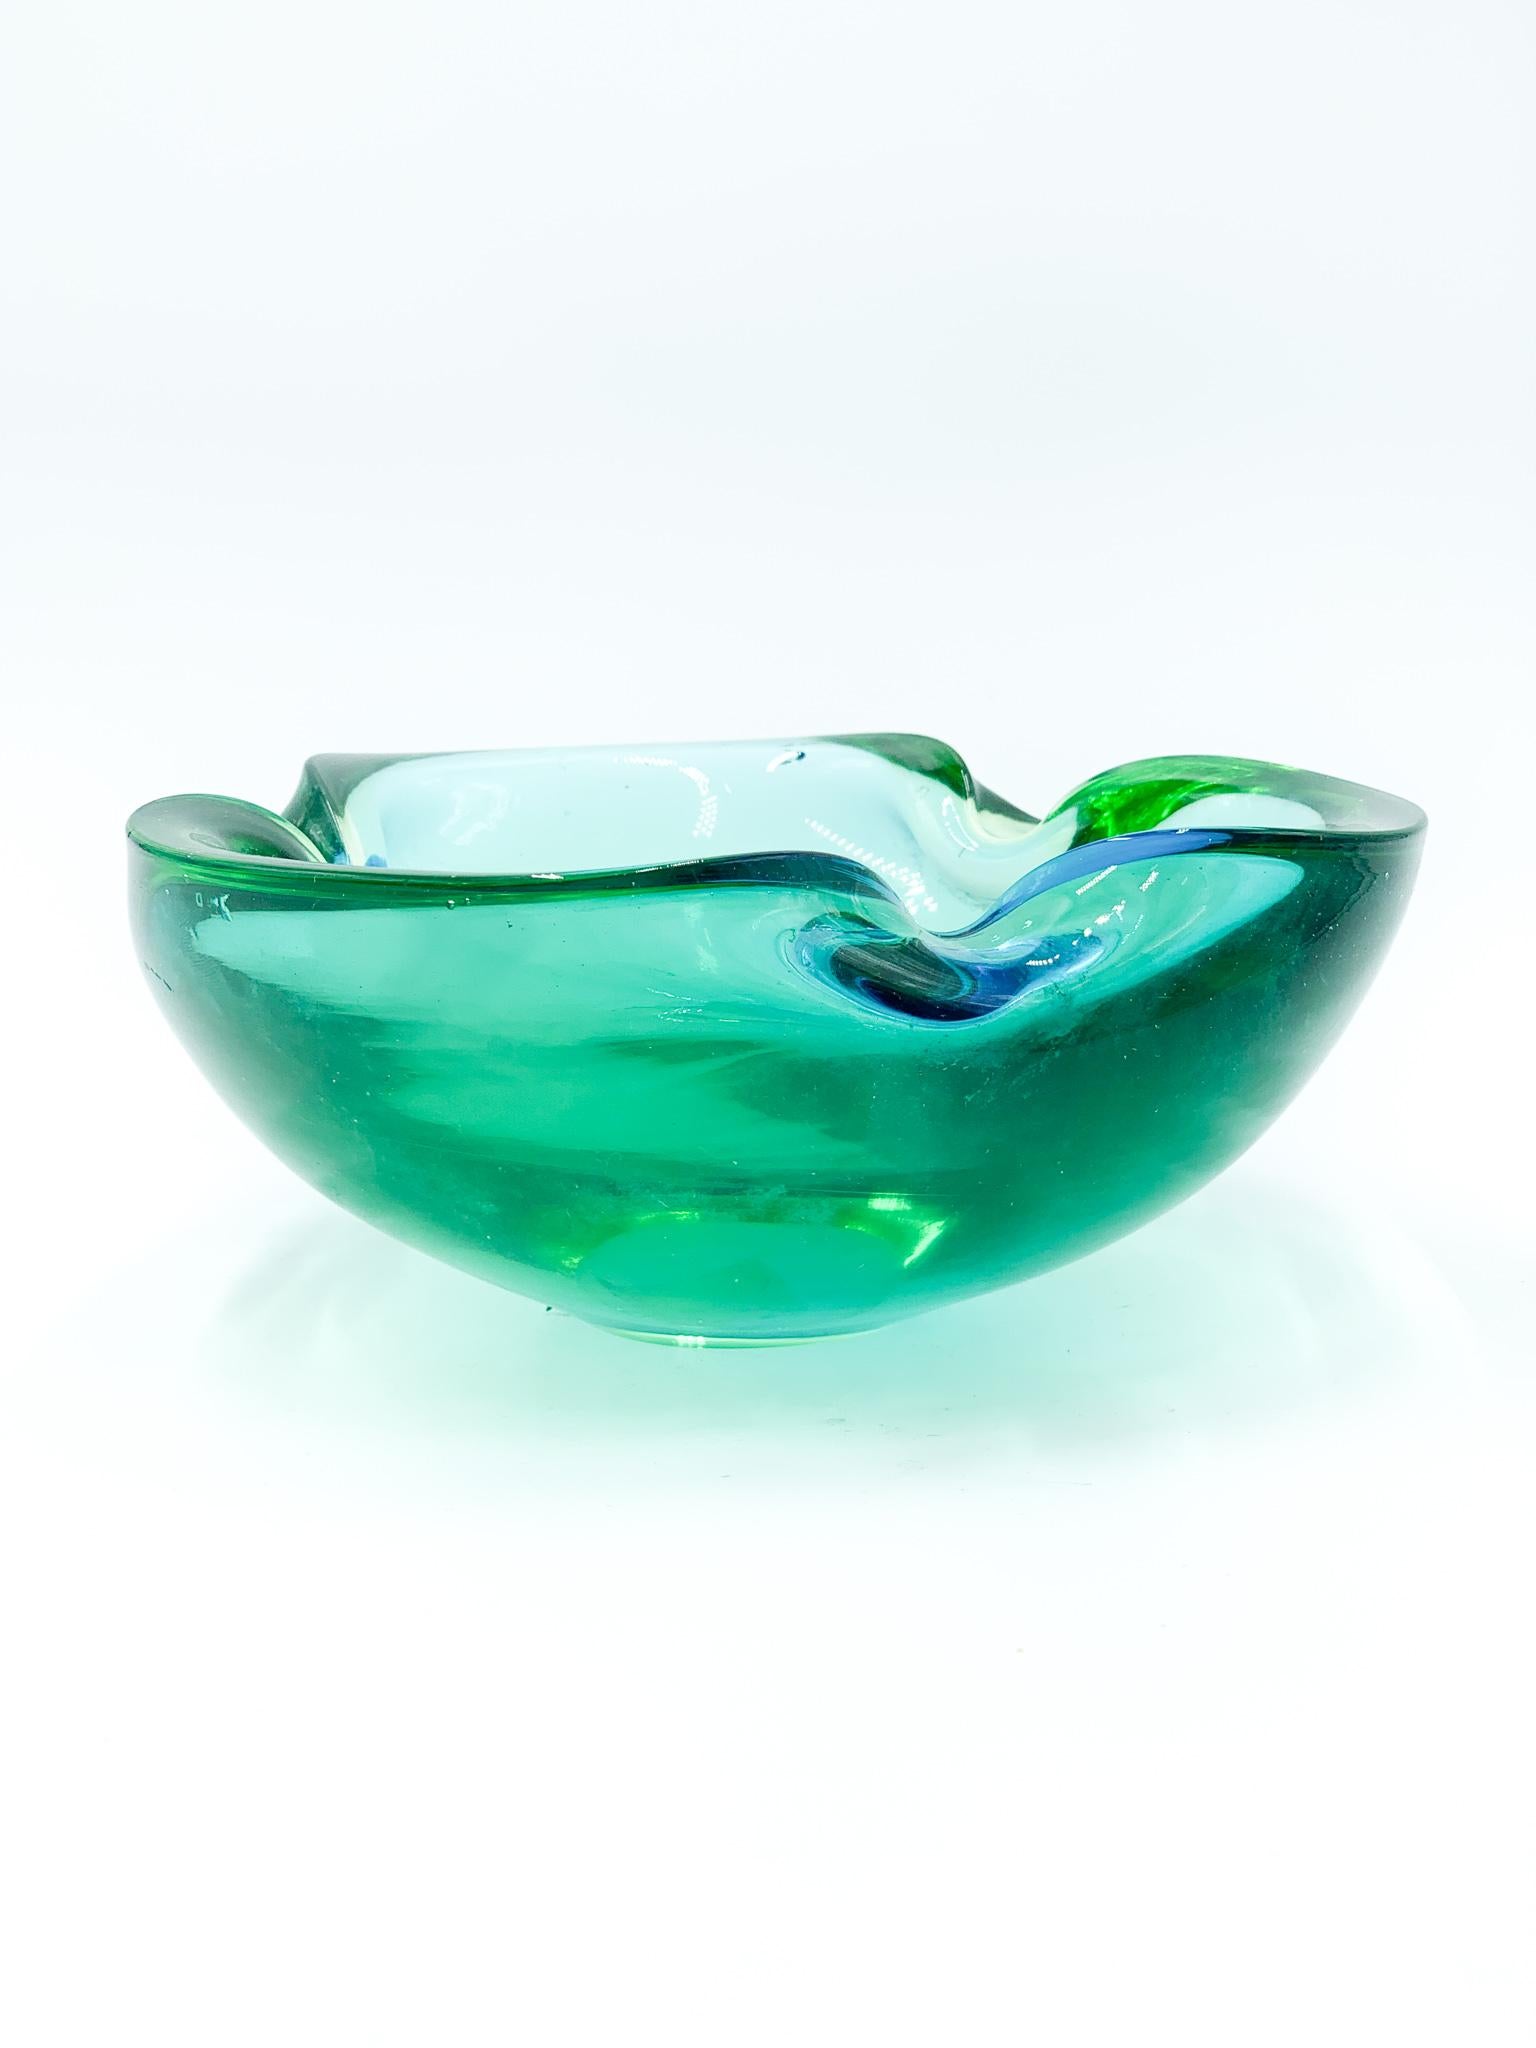 Green Murano Glass Ashtray with Blue Shades by Flavio Poli 1960s In Excellent Condition For Sale In Milano, MI